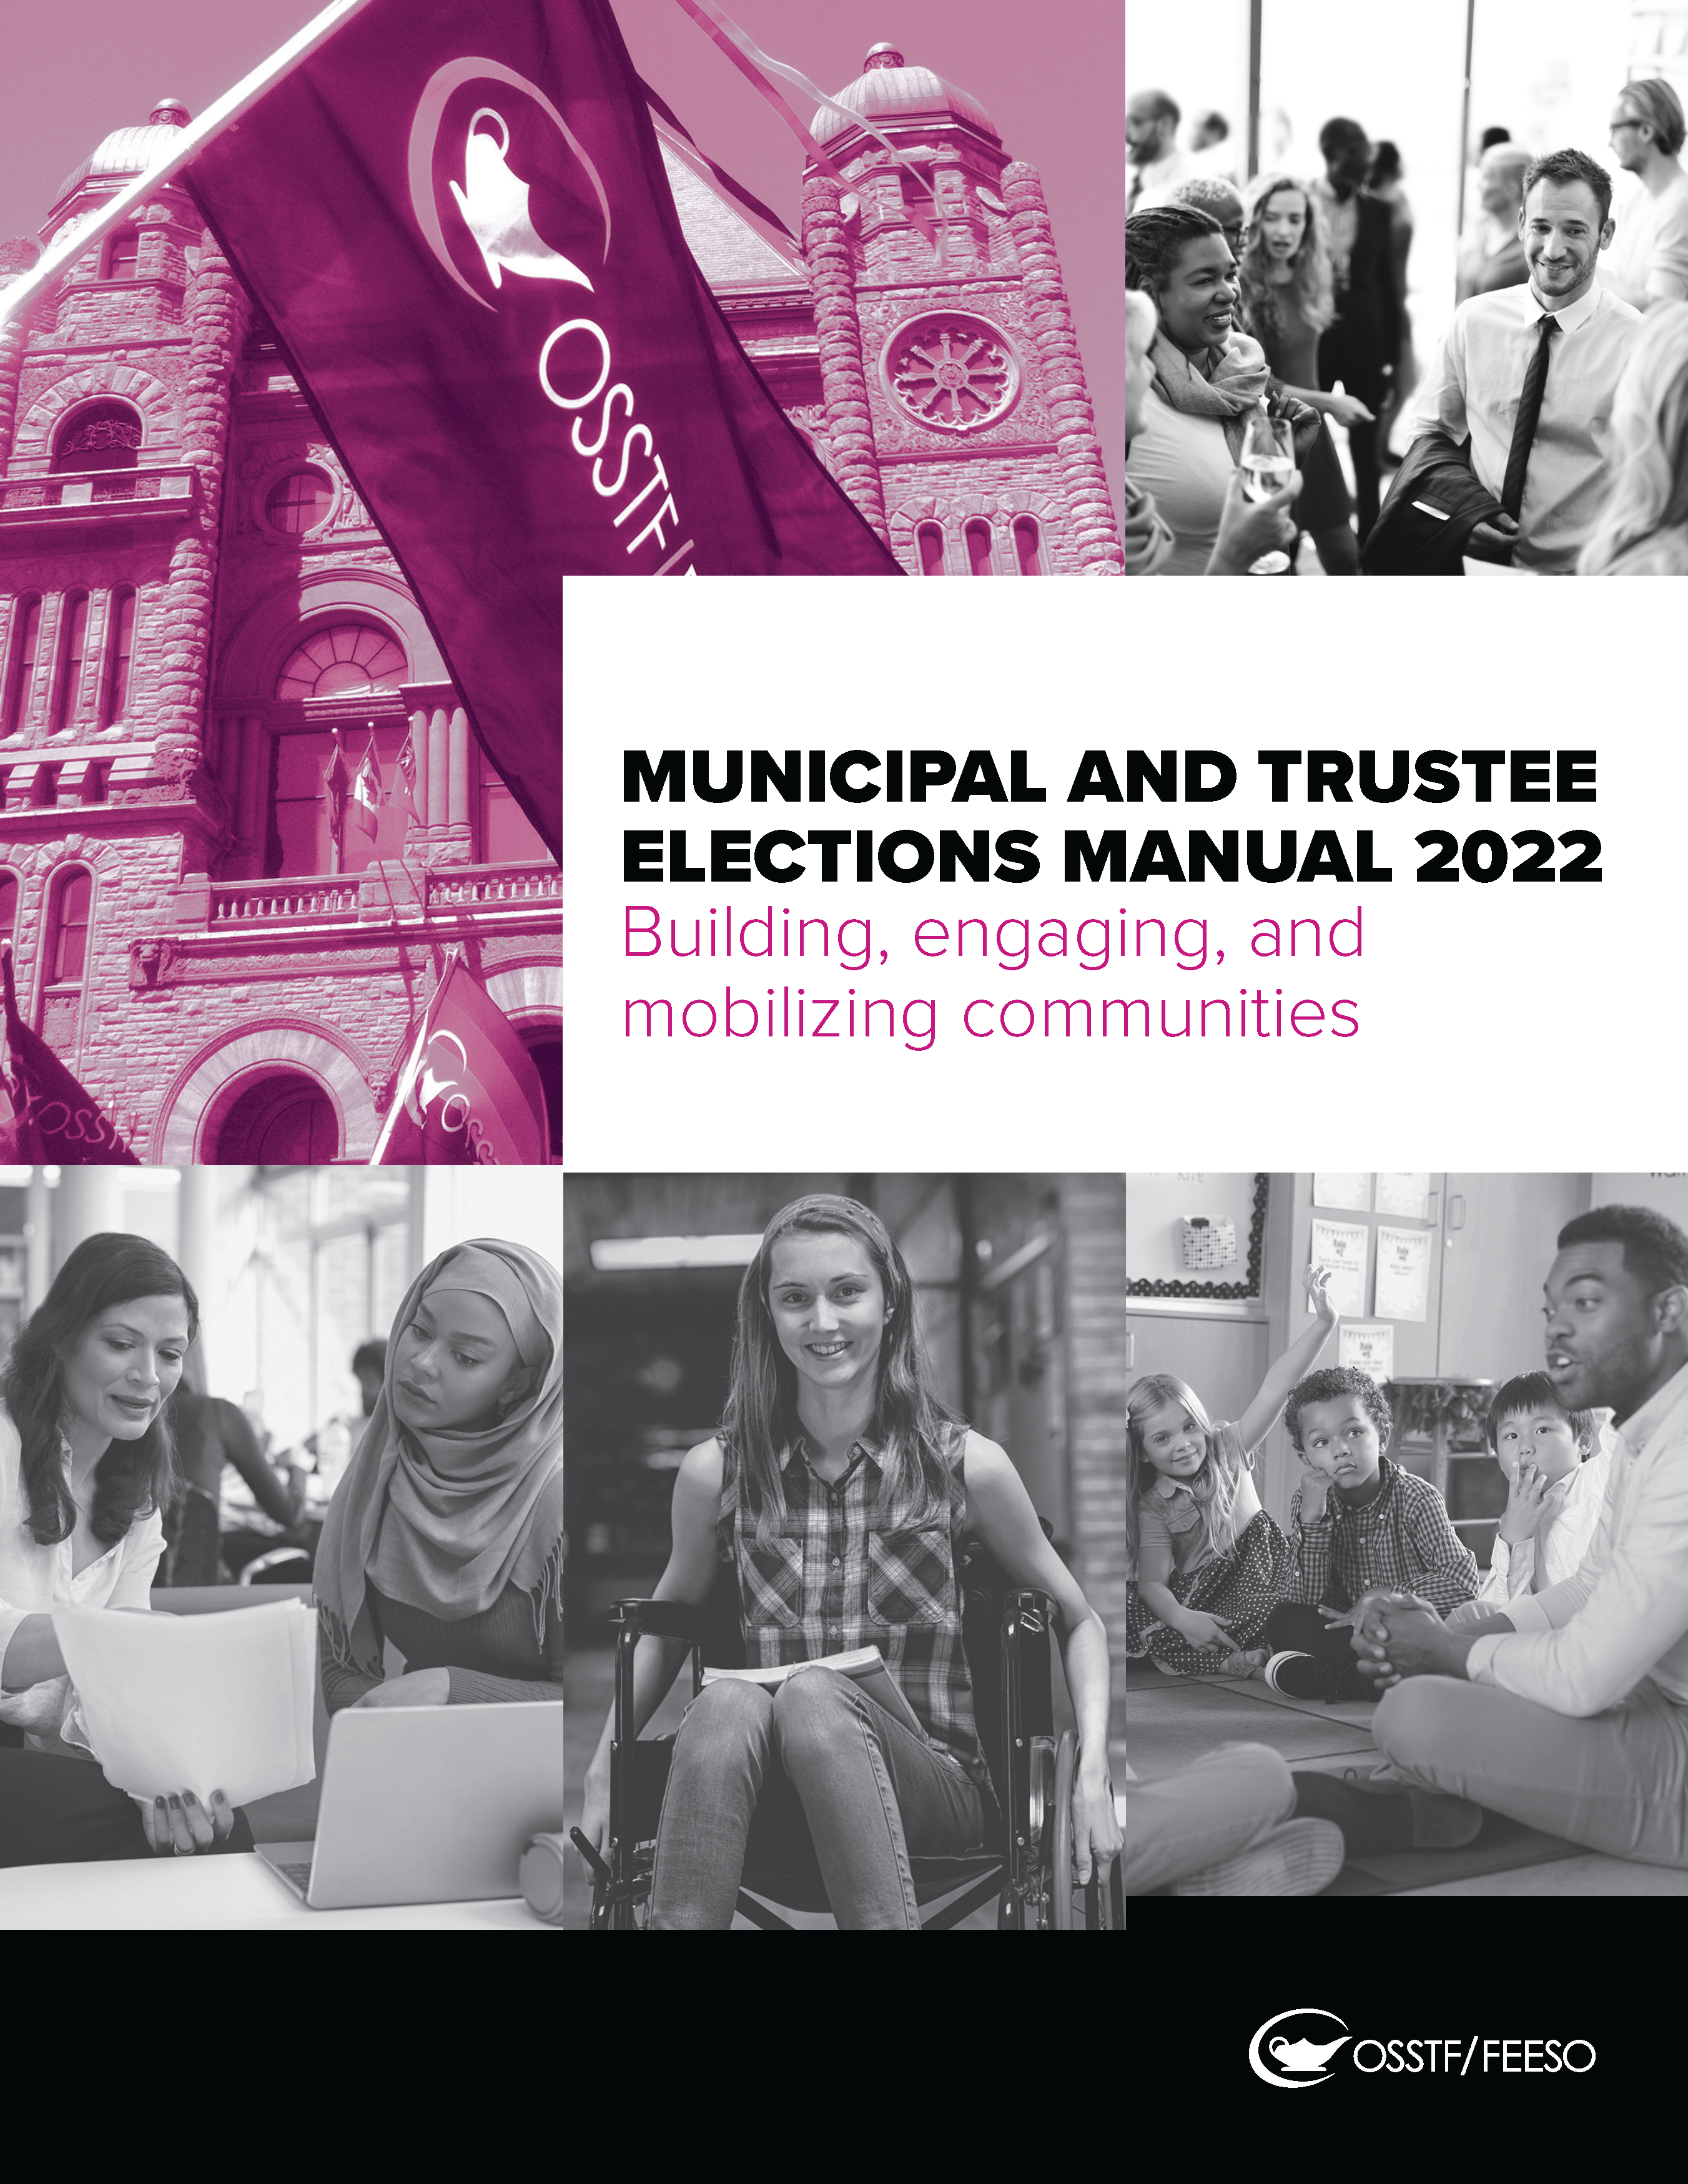 image of front cover of Municipal and trustee election Manual 2022